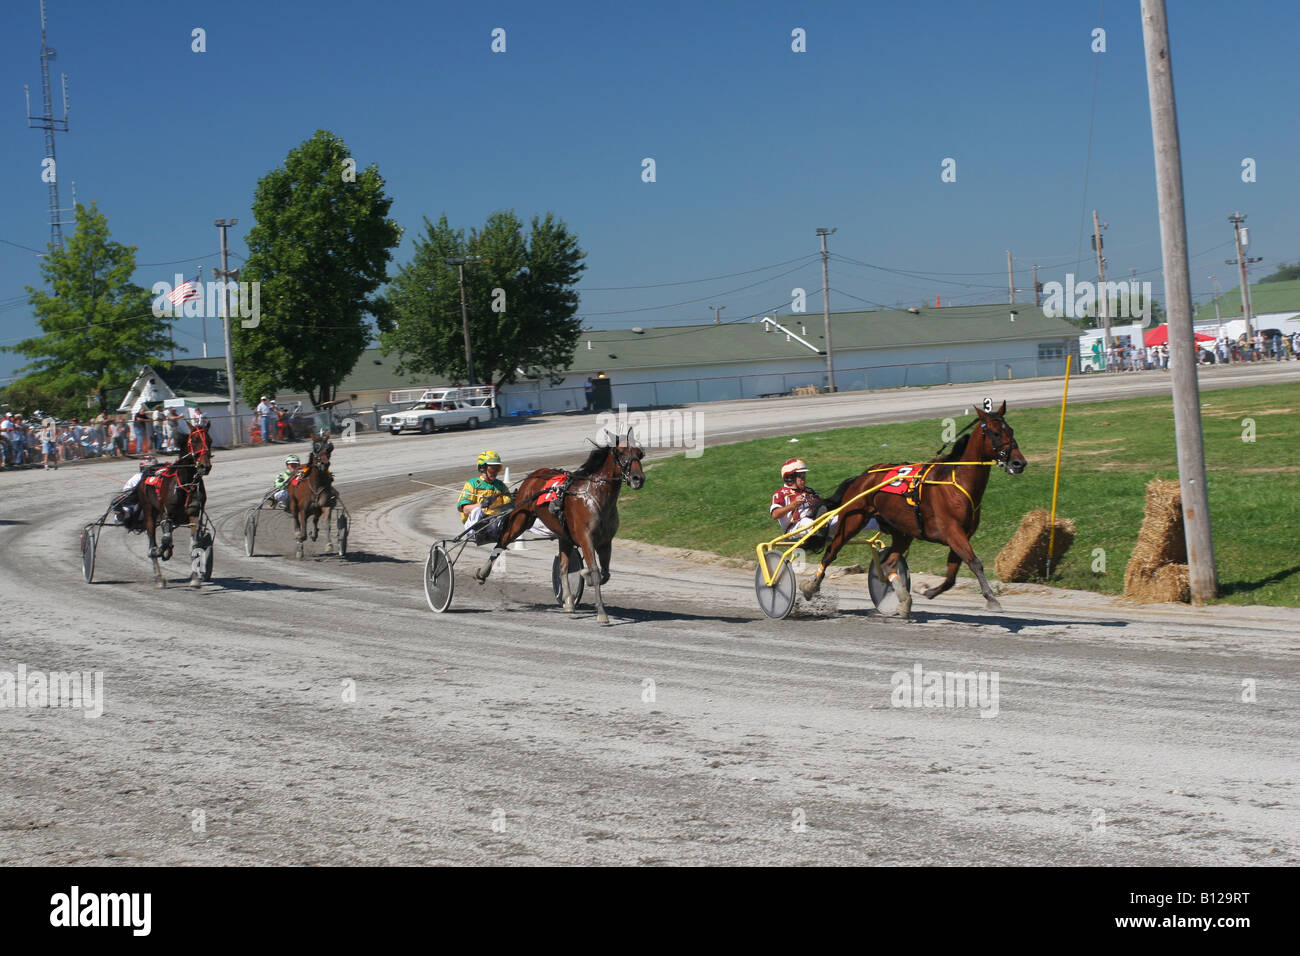 Harness Racing Horse Racing Canfield Fair Canfield Ohio Mahoning County Fair Stock Photo